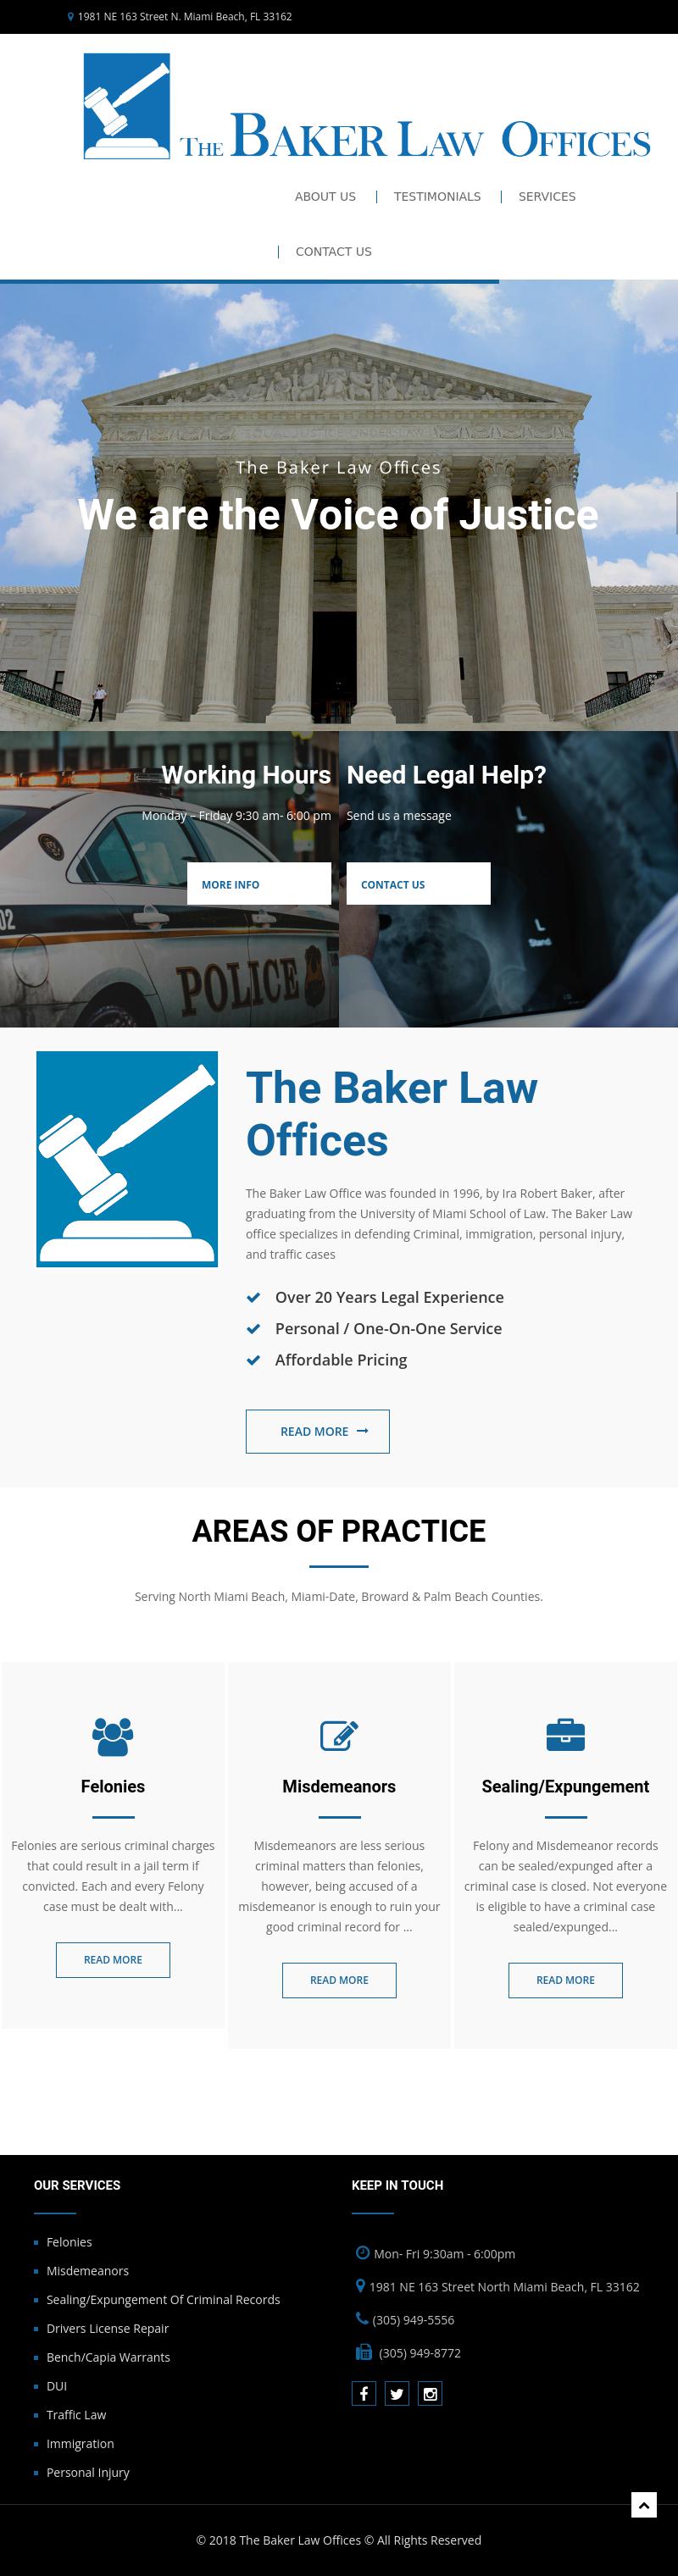 The Baker Law Offices - Miami Gardens FL Lawyers